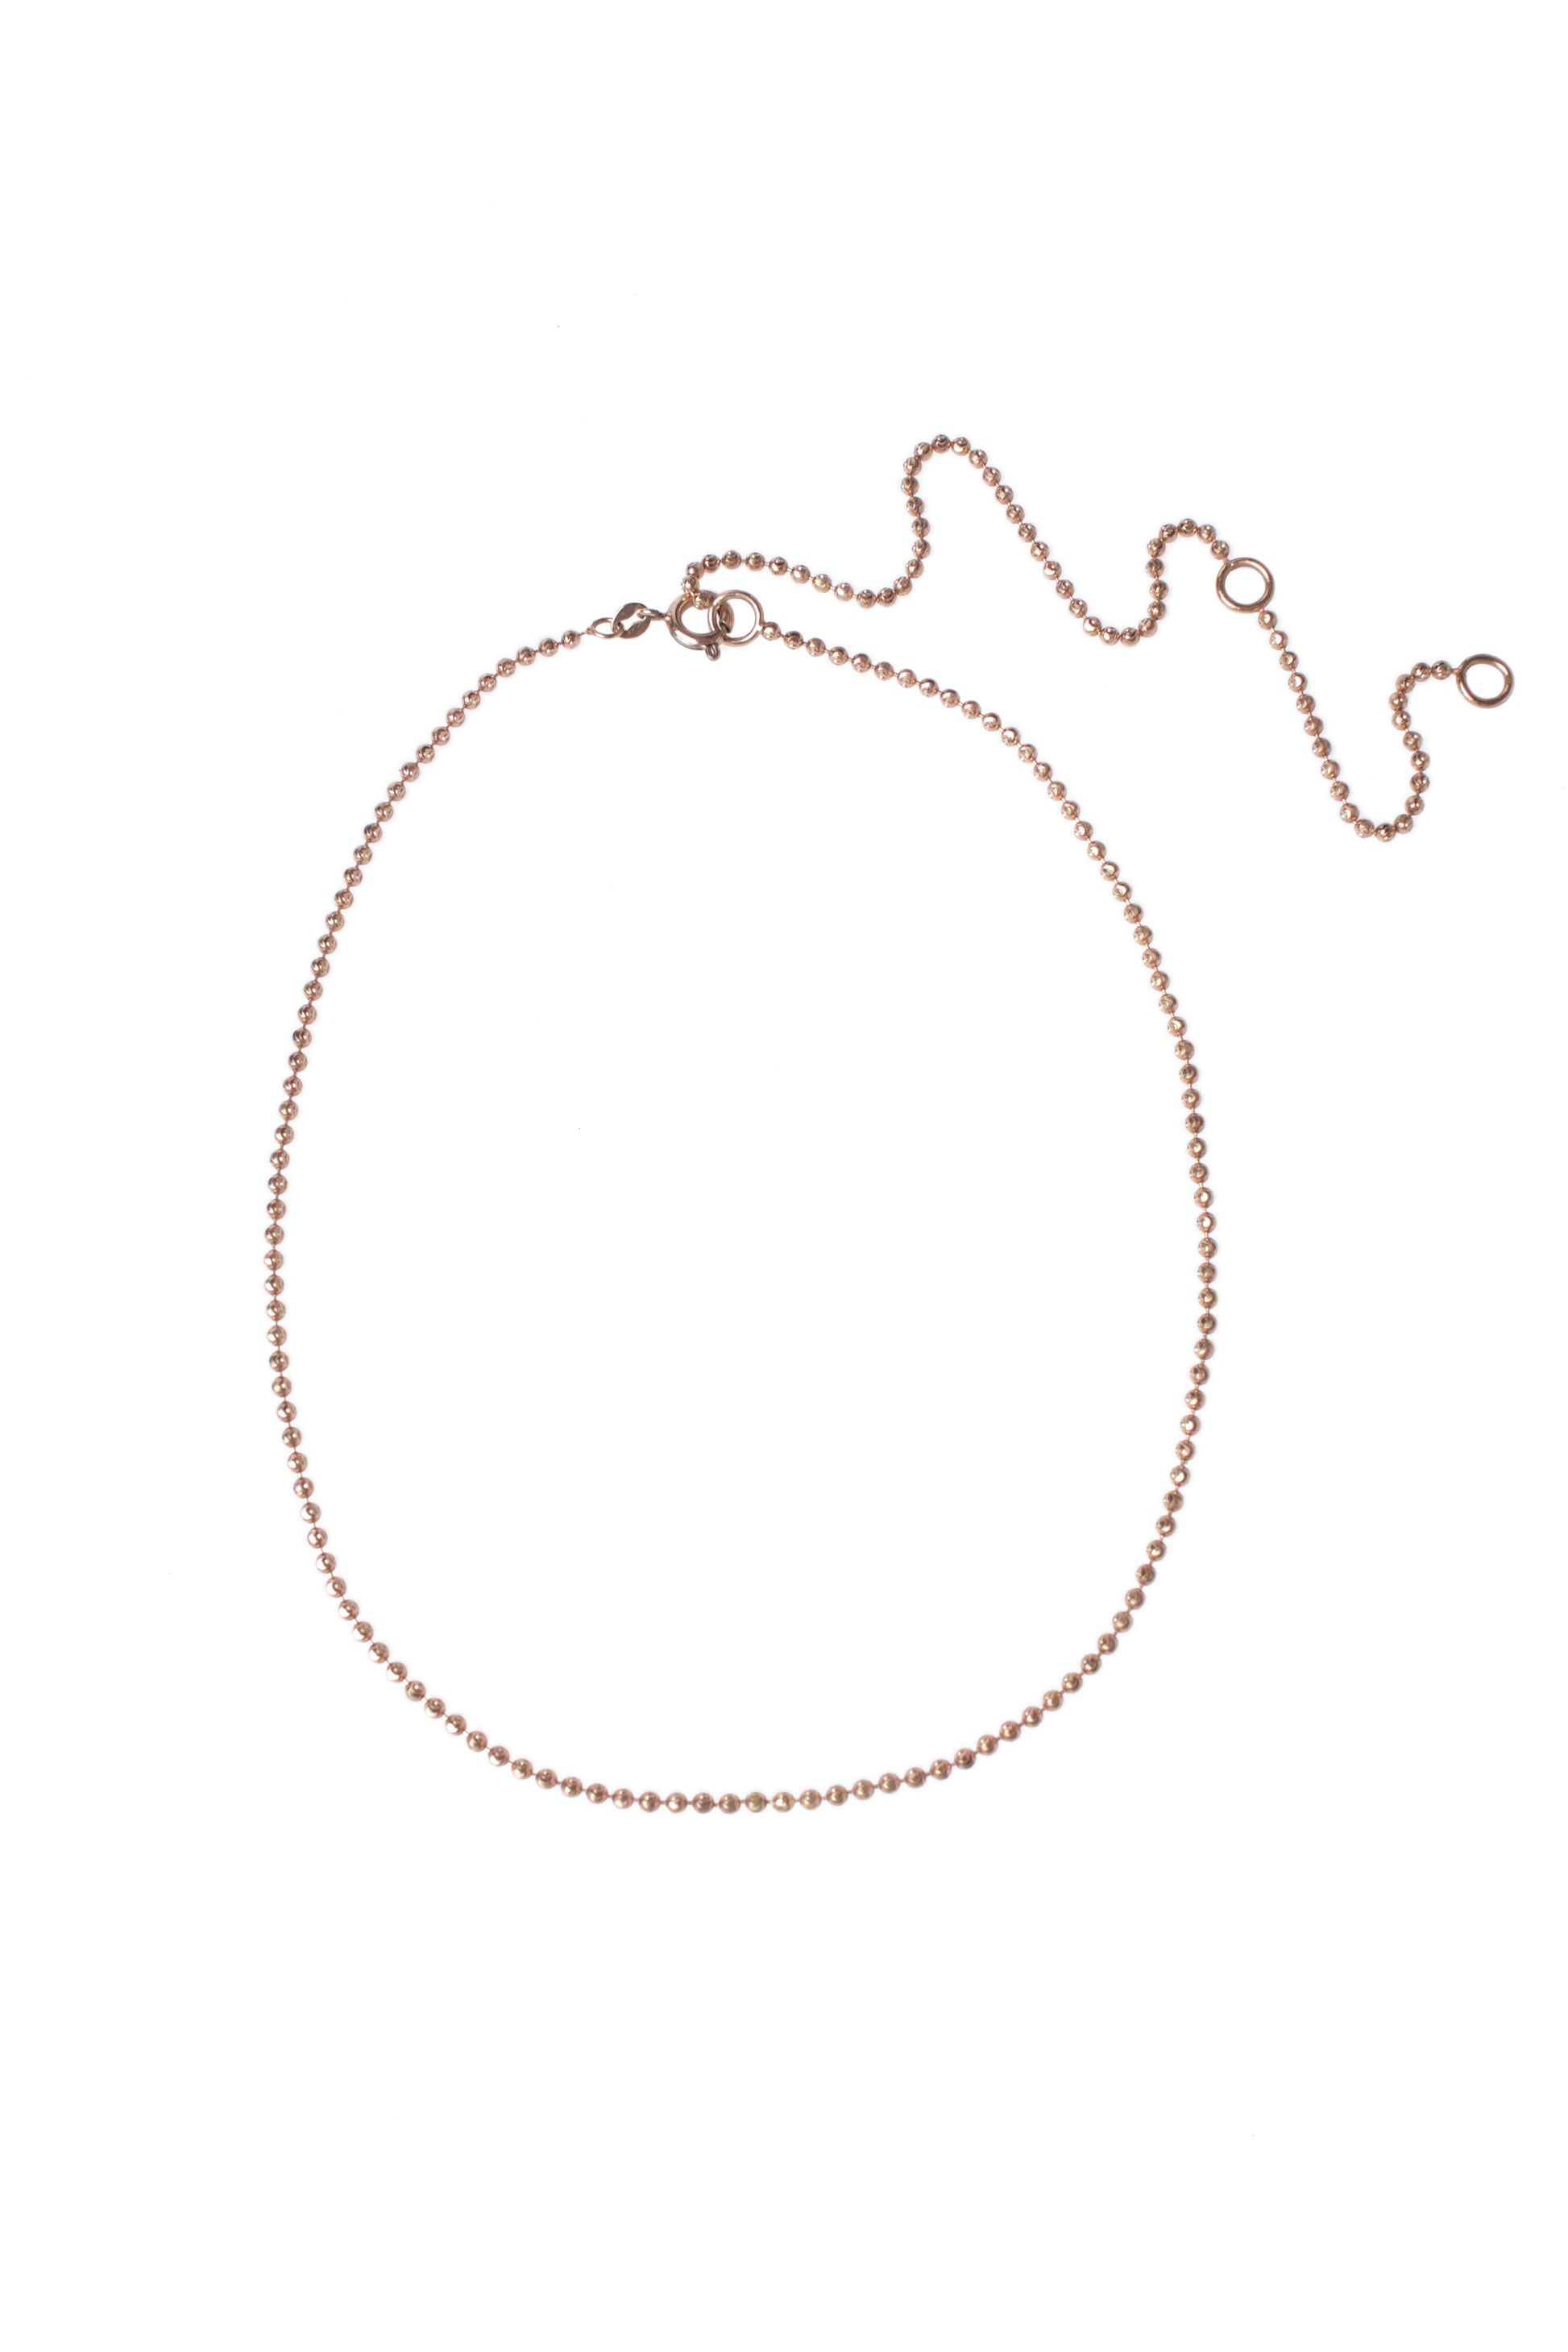 L.A. STEIN Faceted Diamond Cut Bead Chain Necklace in Rose Gold